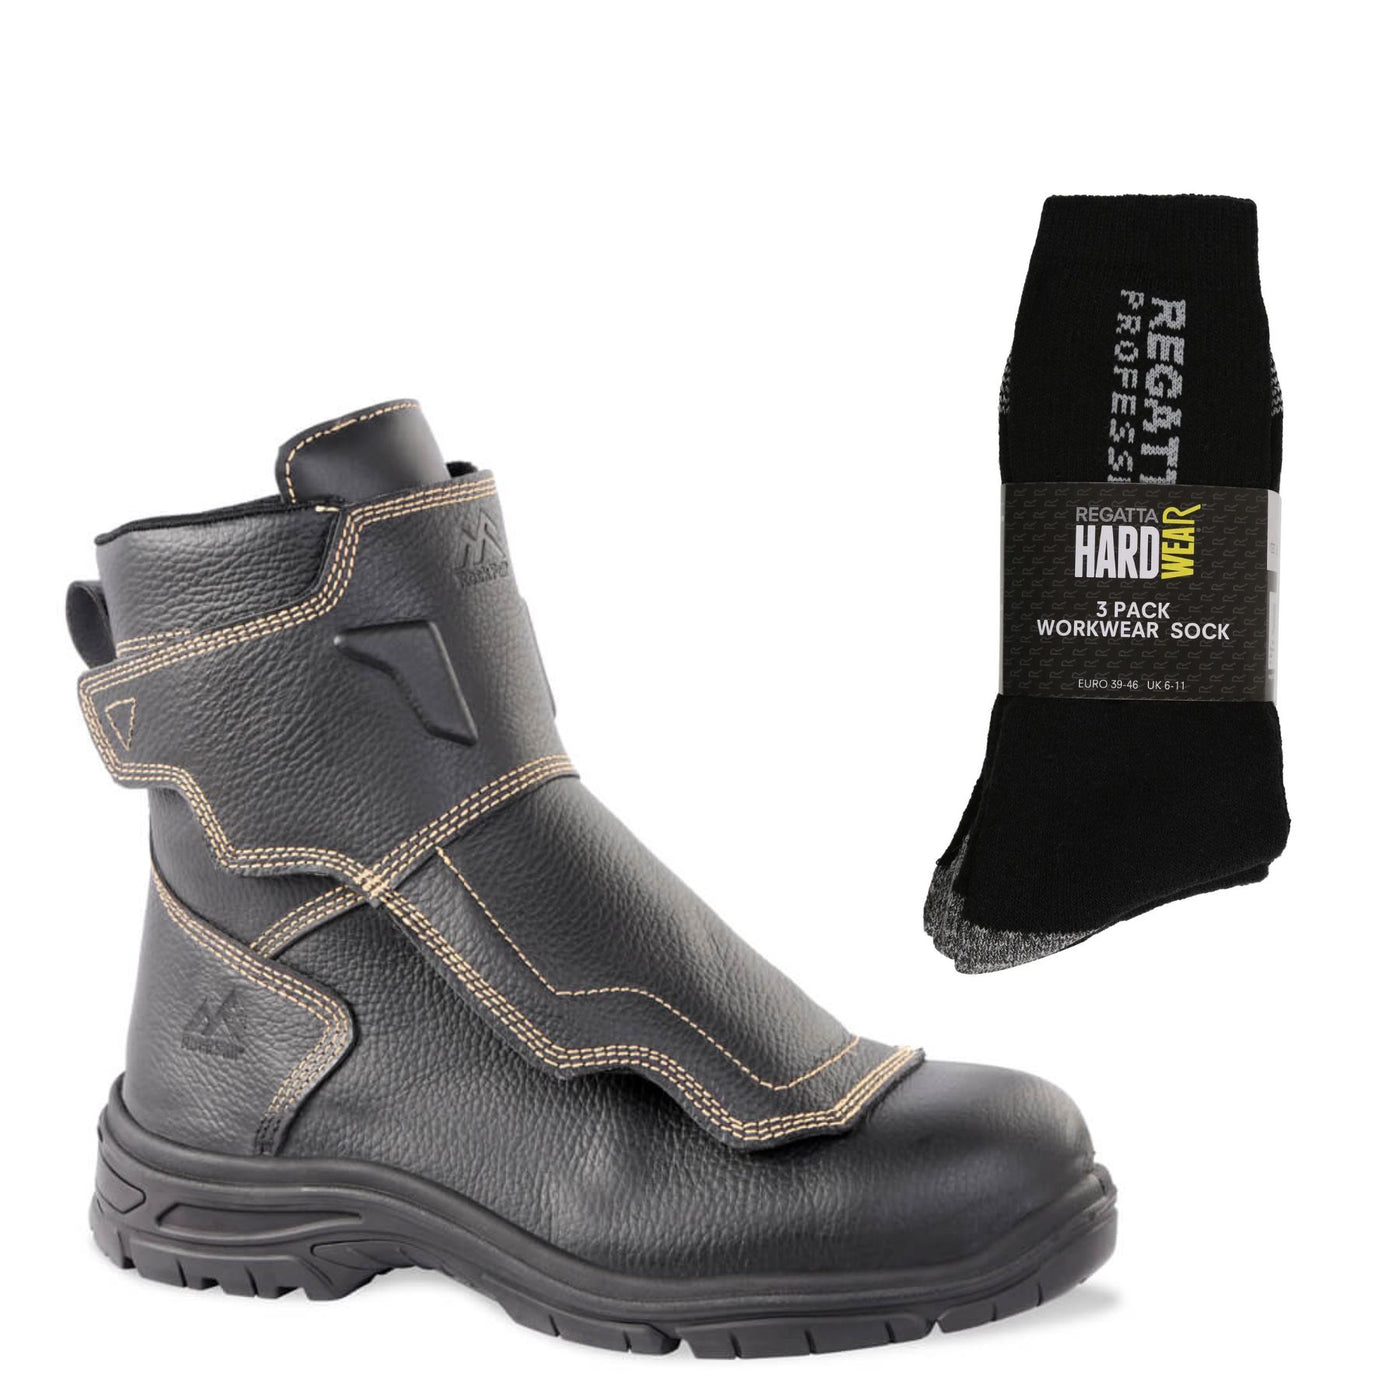 RockFall Helios Special Offer Pack - RF8000 High Leg Electrical Hazard Foundry Boots + 3 Pairs Work Socks